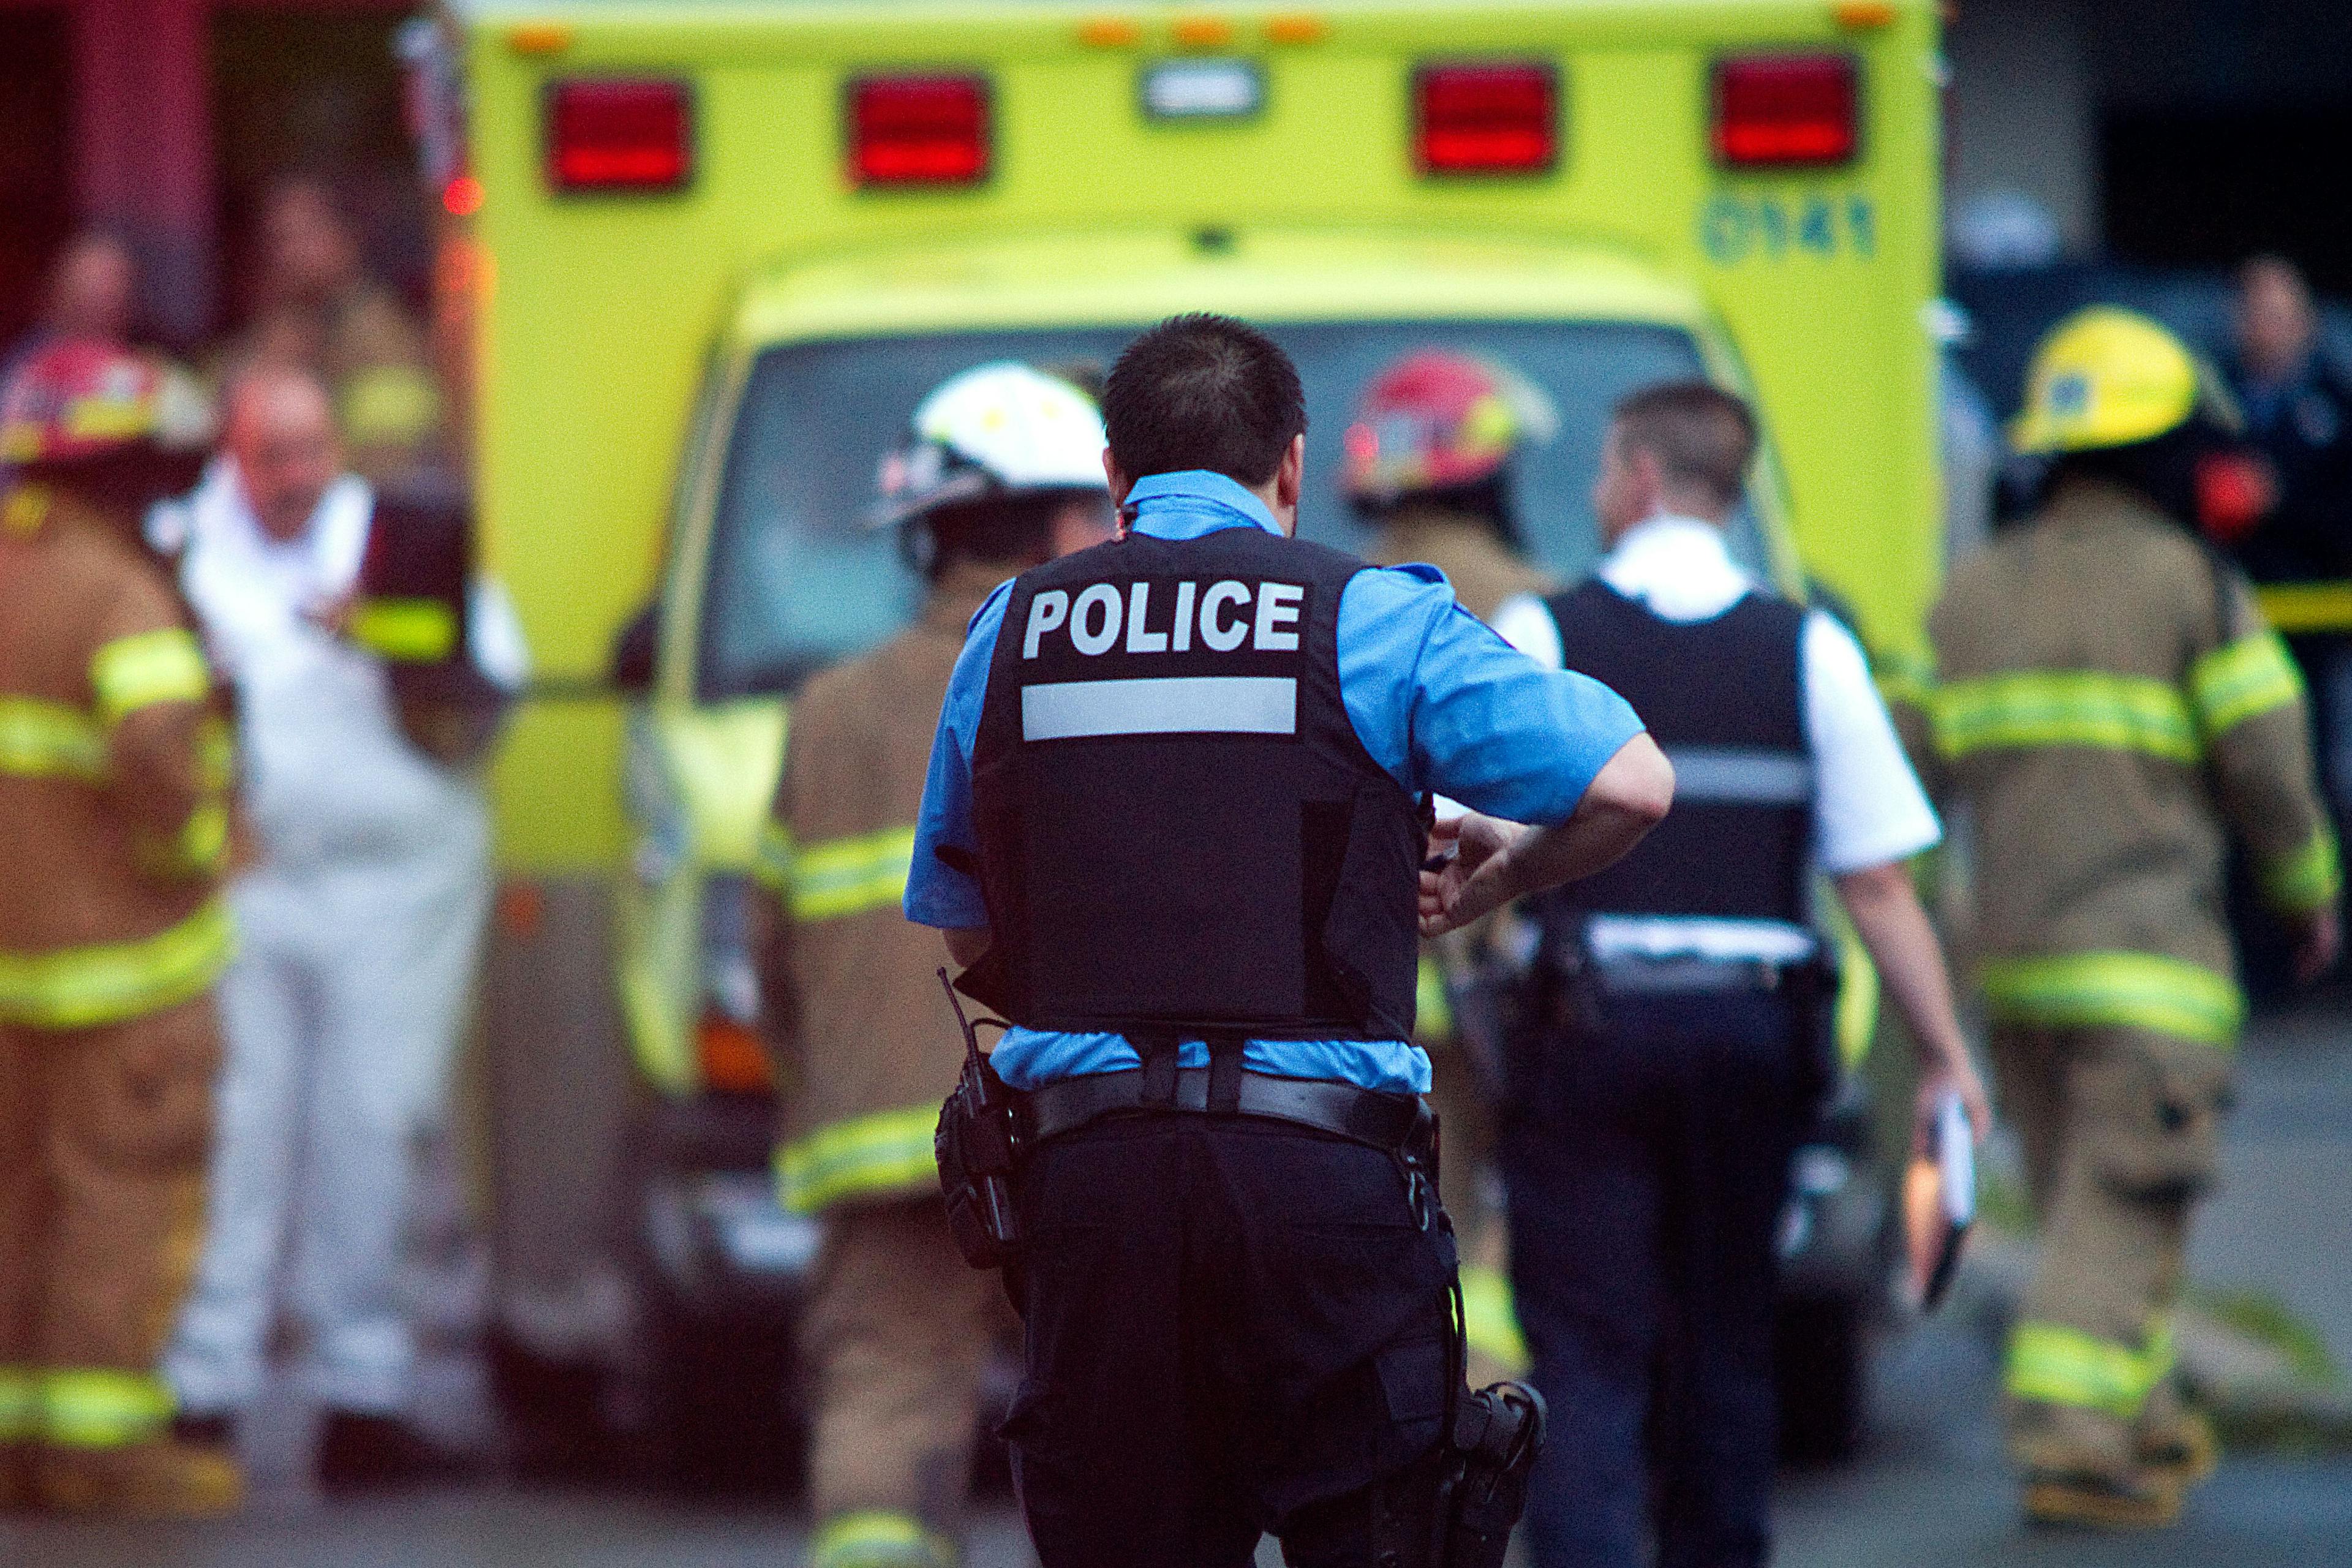 We Need to Care About the Mental Health of Police, Too